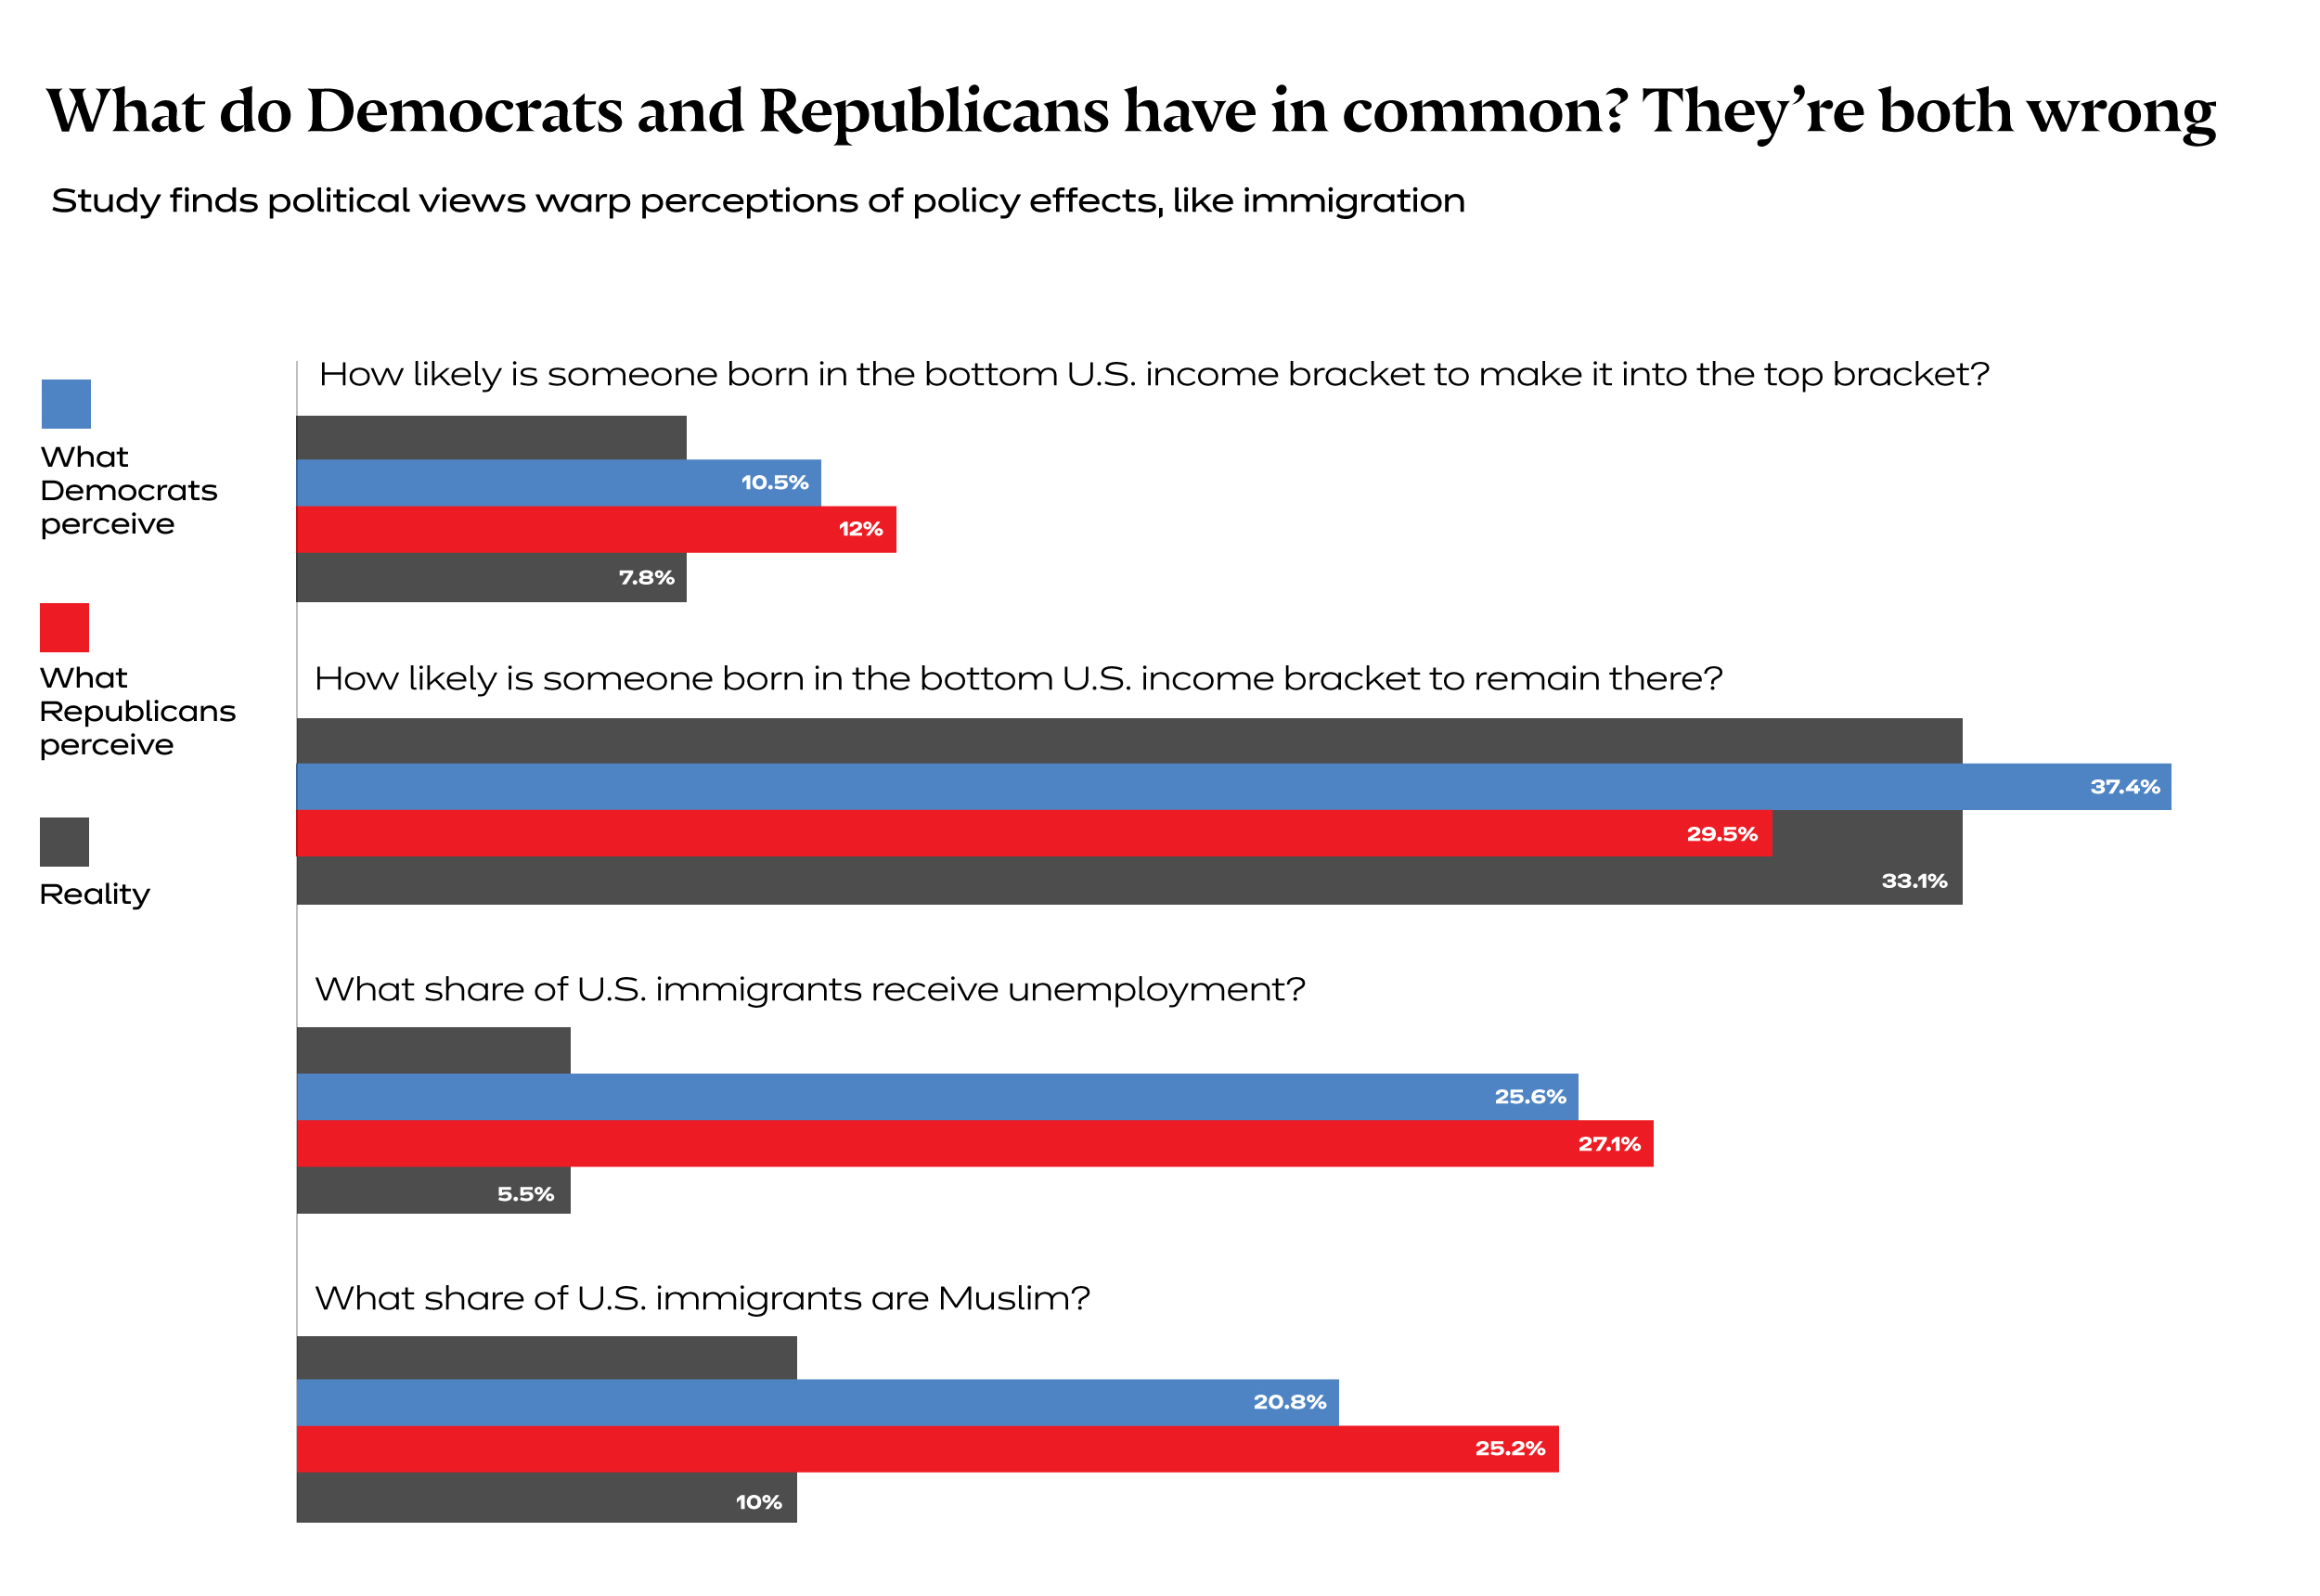 Bar chart shows Democrat and Republic perceptions of statistics about immigration vs. the reality, and how both are skewed.